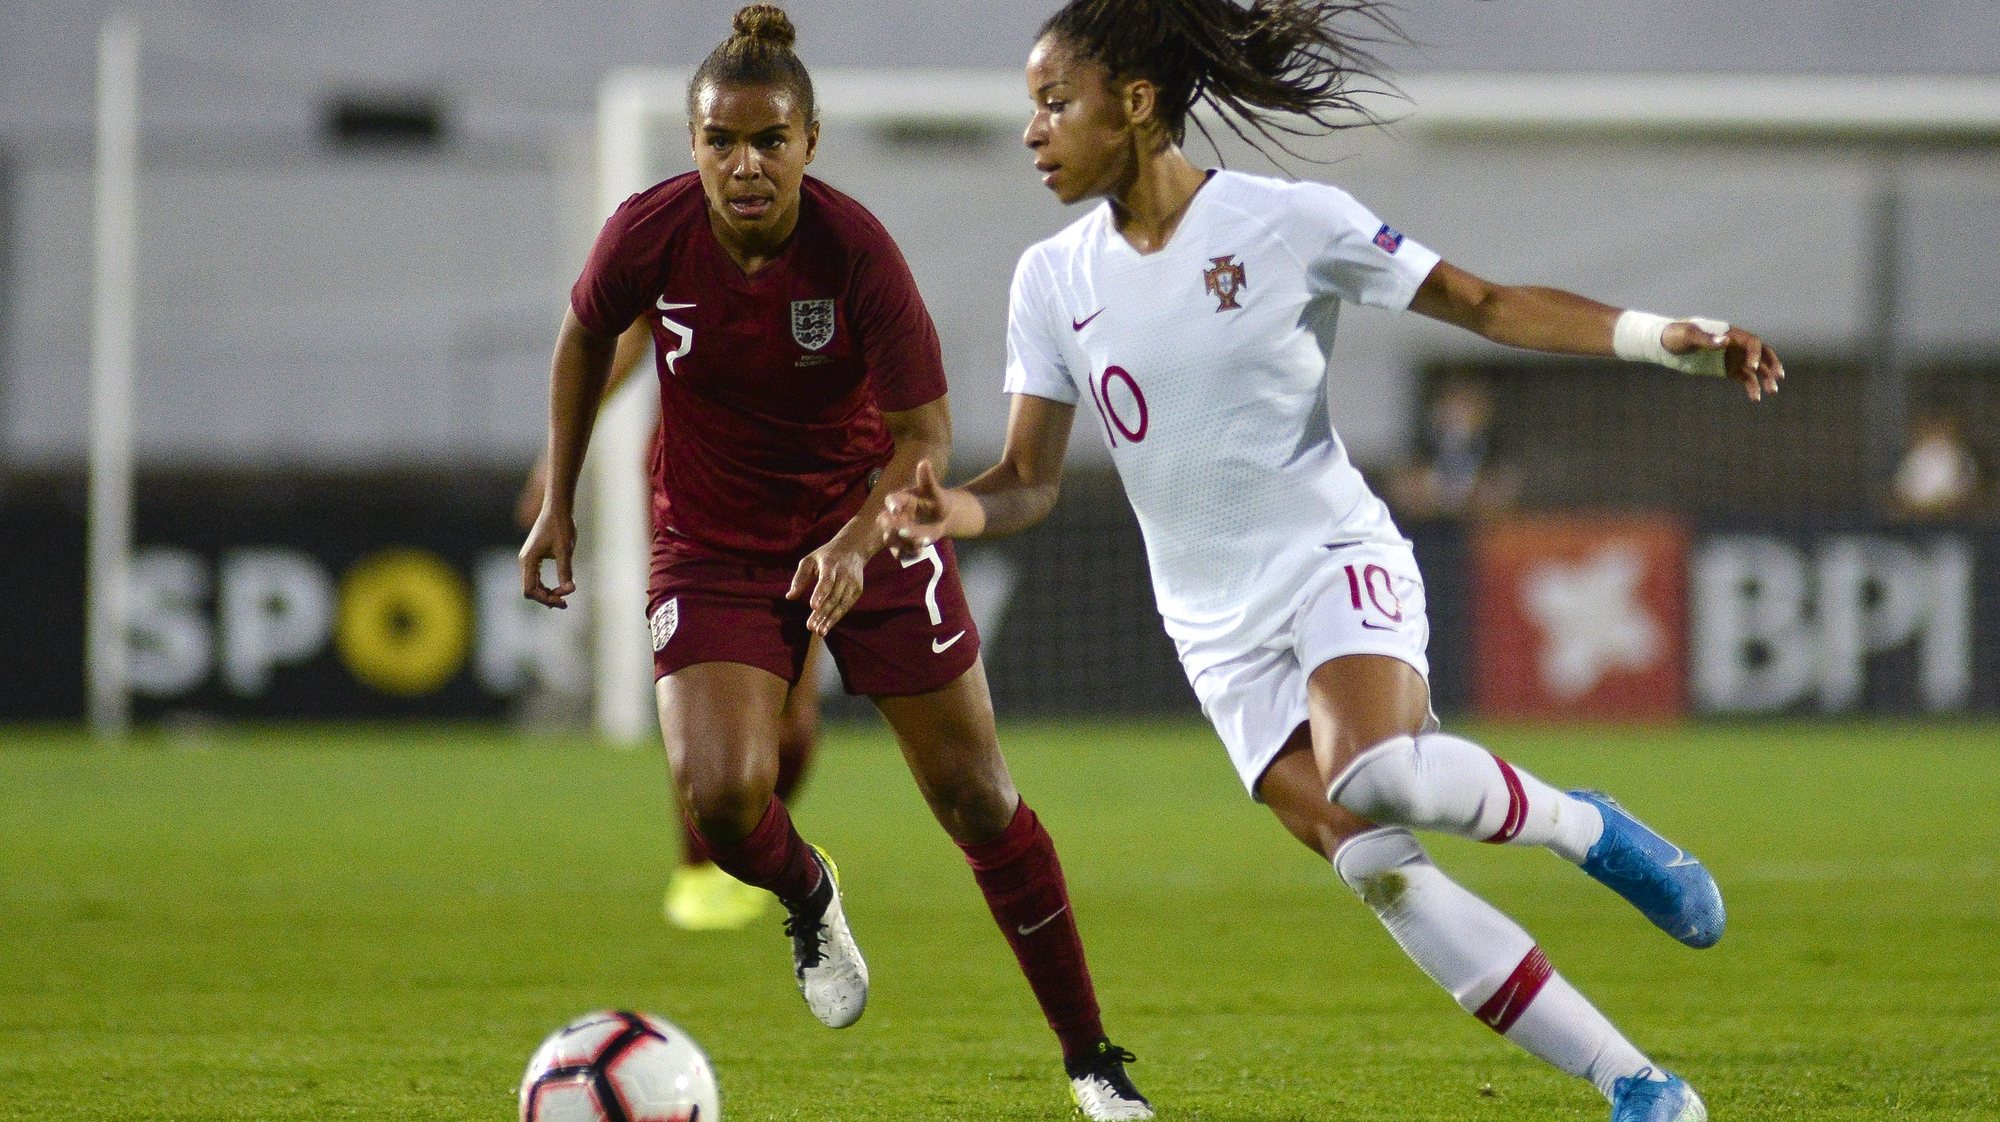 Portugal`s Jessica Silva (R) fights for the ball with Nikita Parris of England during their friendly women soccer match held at Bonfim Stadium, Setubal, Portugal, 8th October 2019. RUI MINDERICO/LUSA